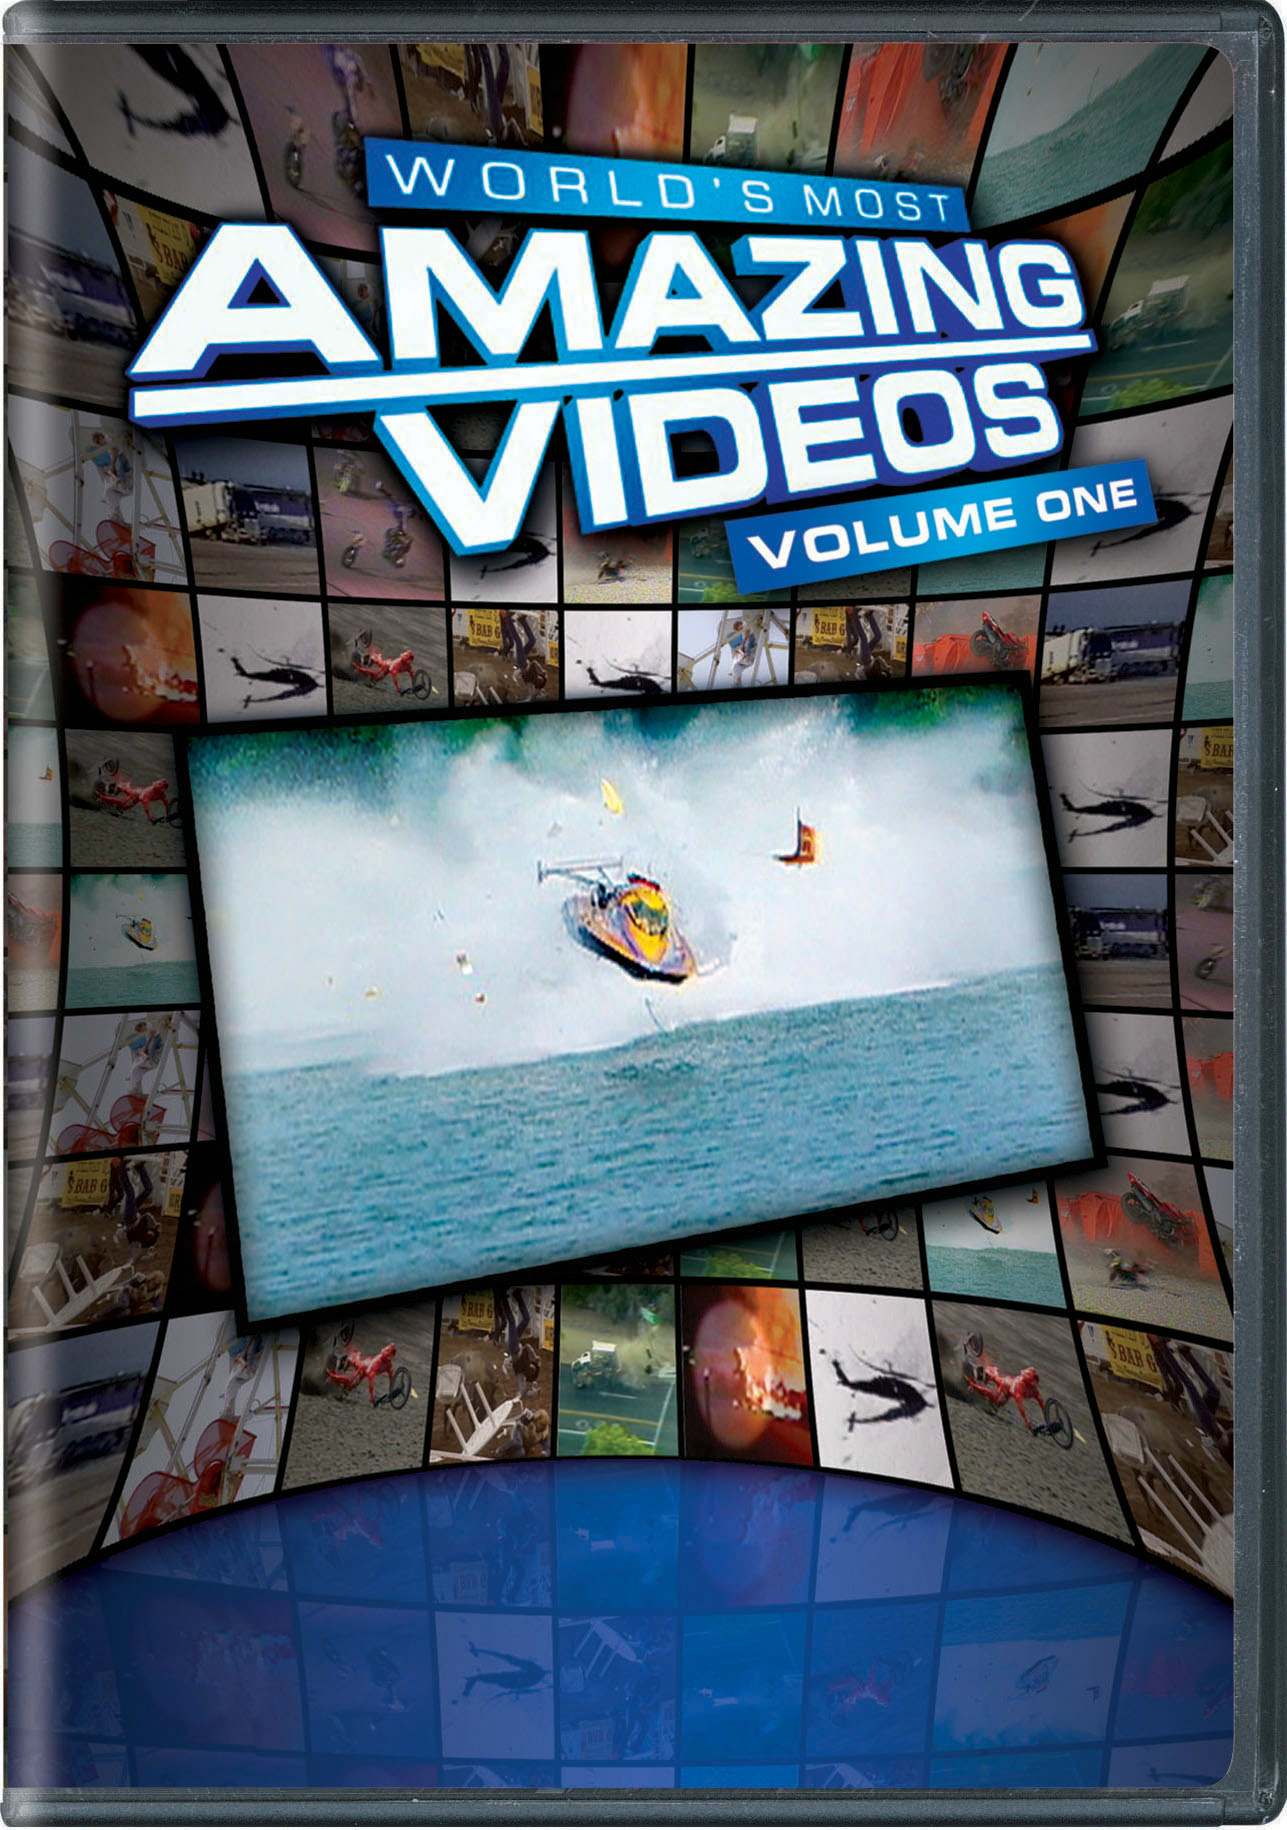 World's Most Amazing Videos: Volume One - DVD   - Lifestyle Television On DVD - TV Shows On GRUV